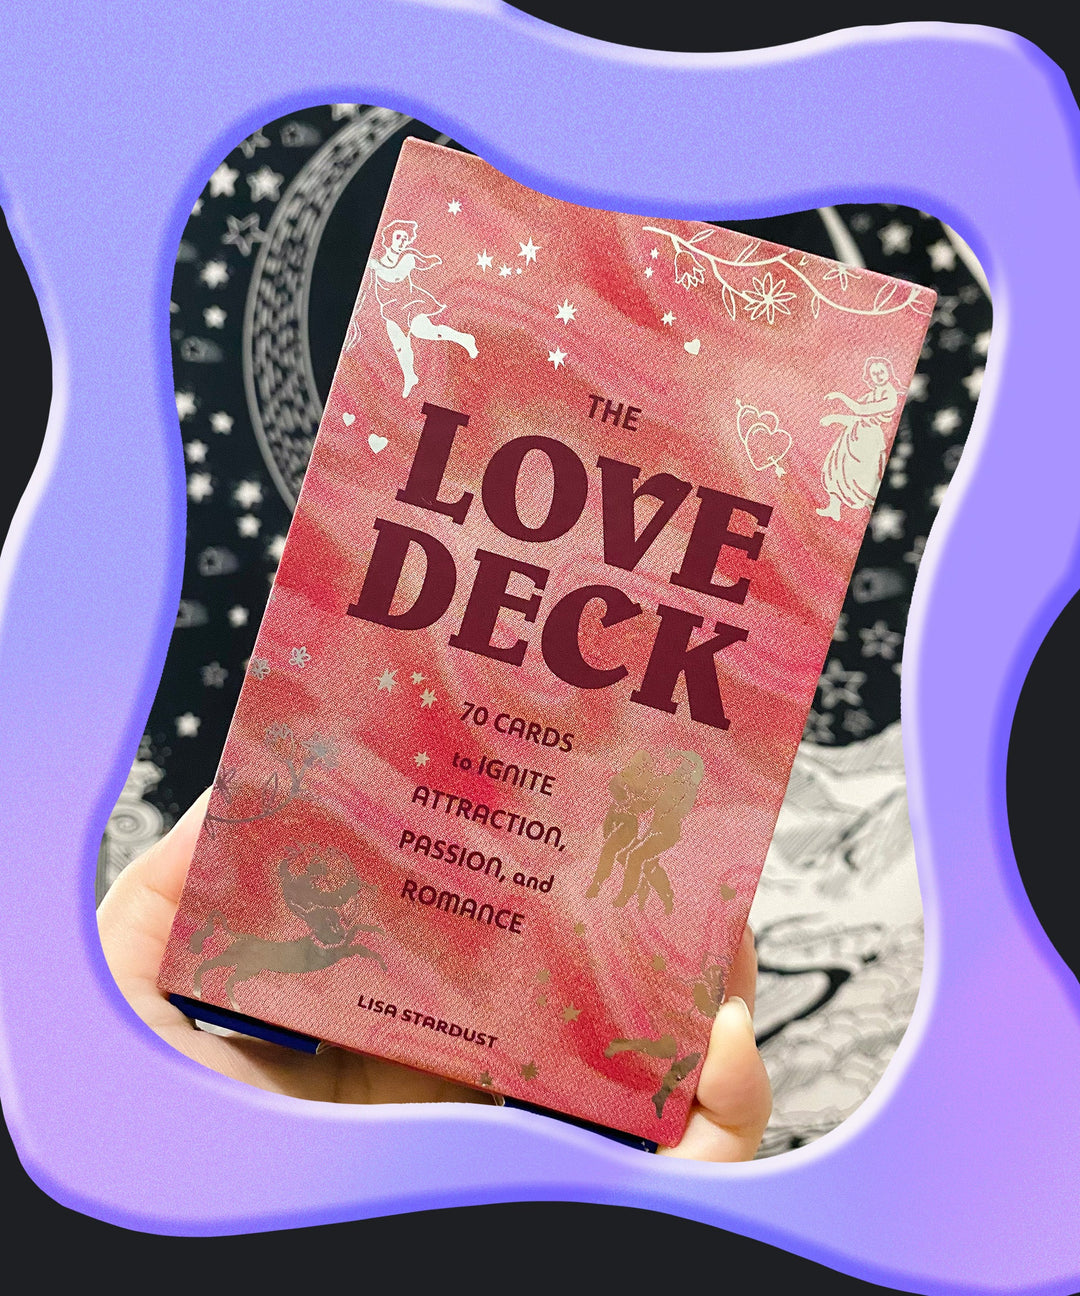 THE LOVE DECK